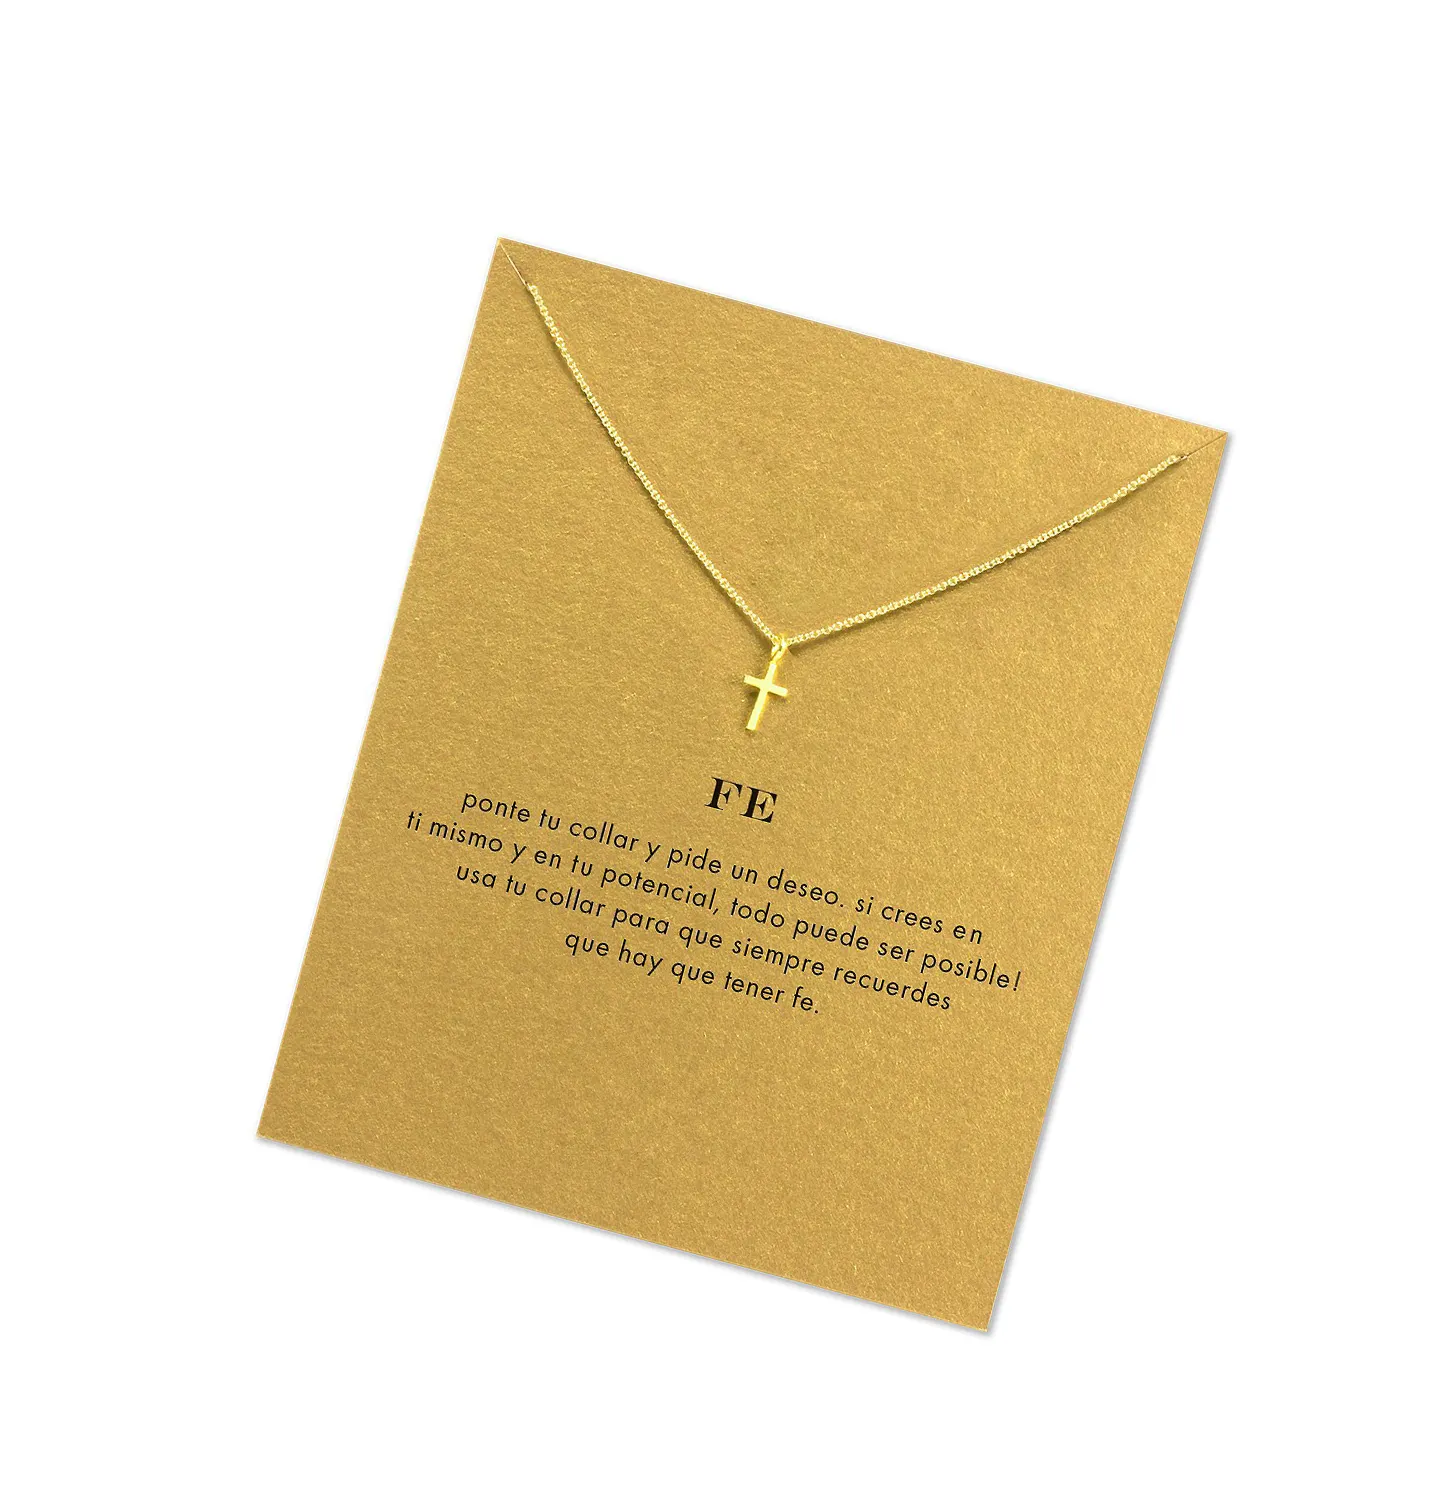 Make a Wish Gift Card Necklace Gold Silver Color compass Square Pendant Necklace For Women Fashion Jewelry Birthday Gift